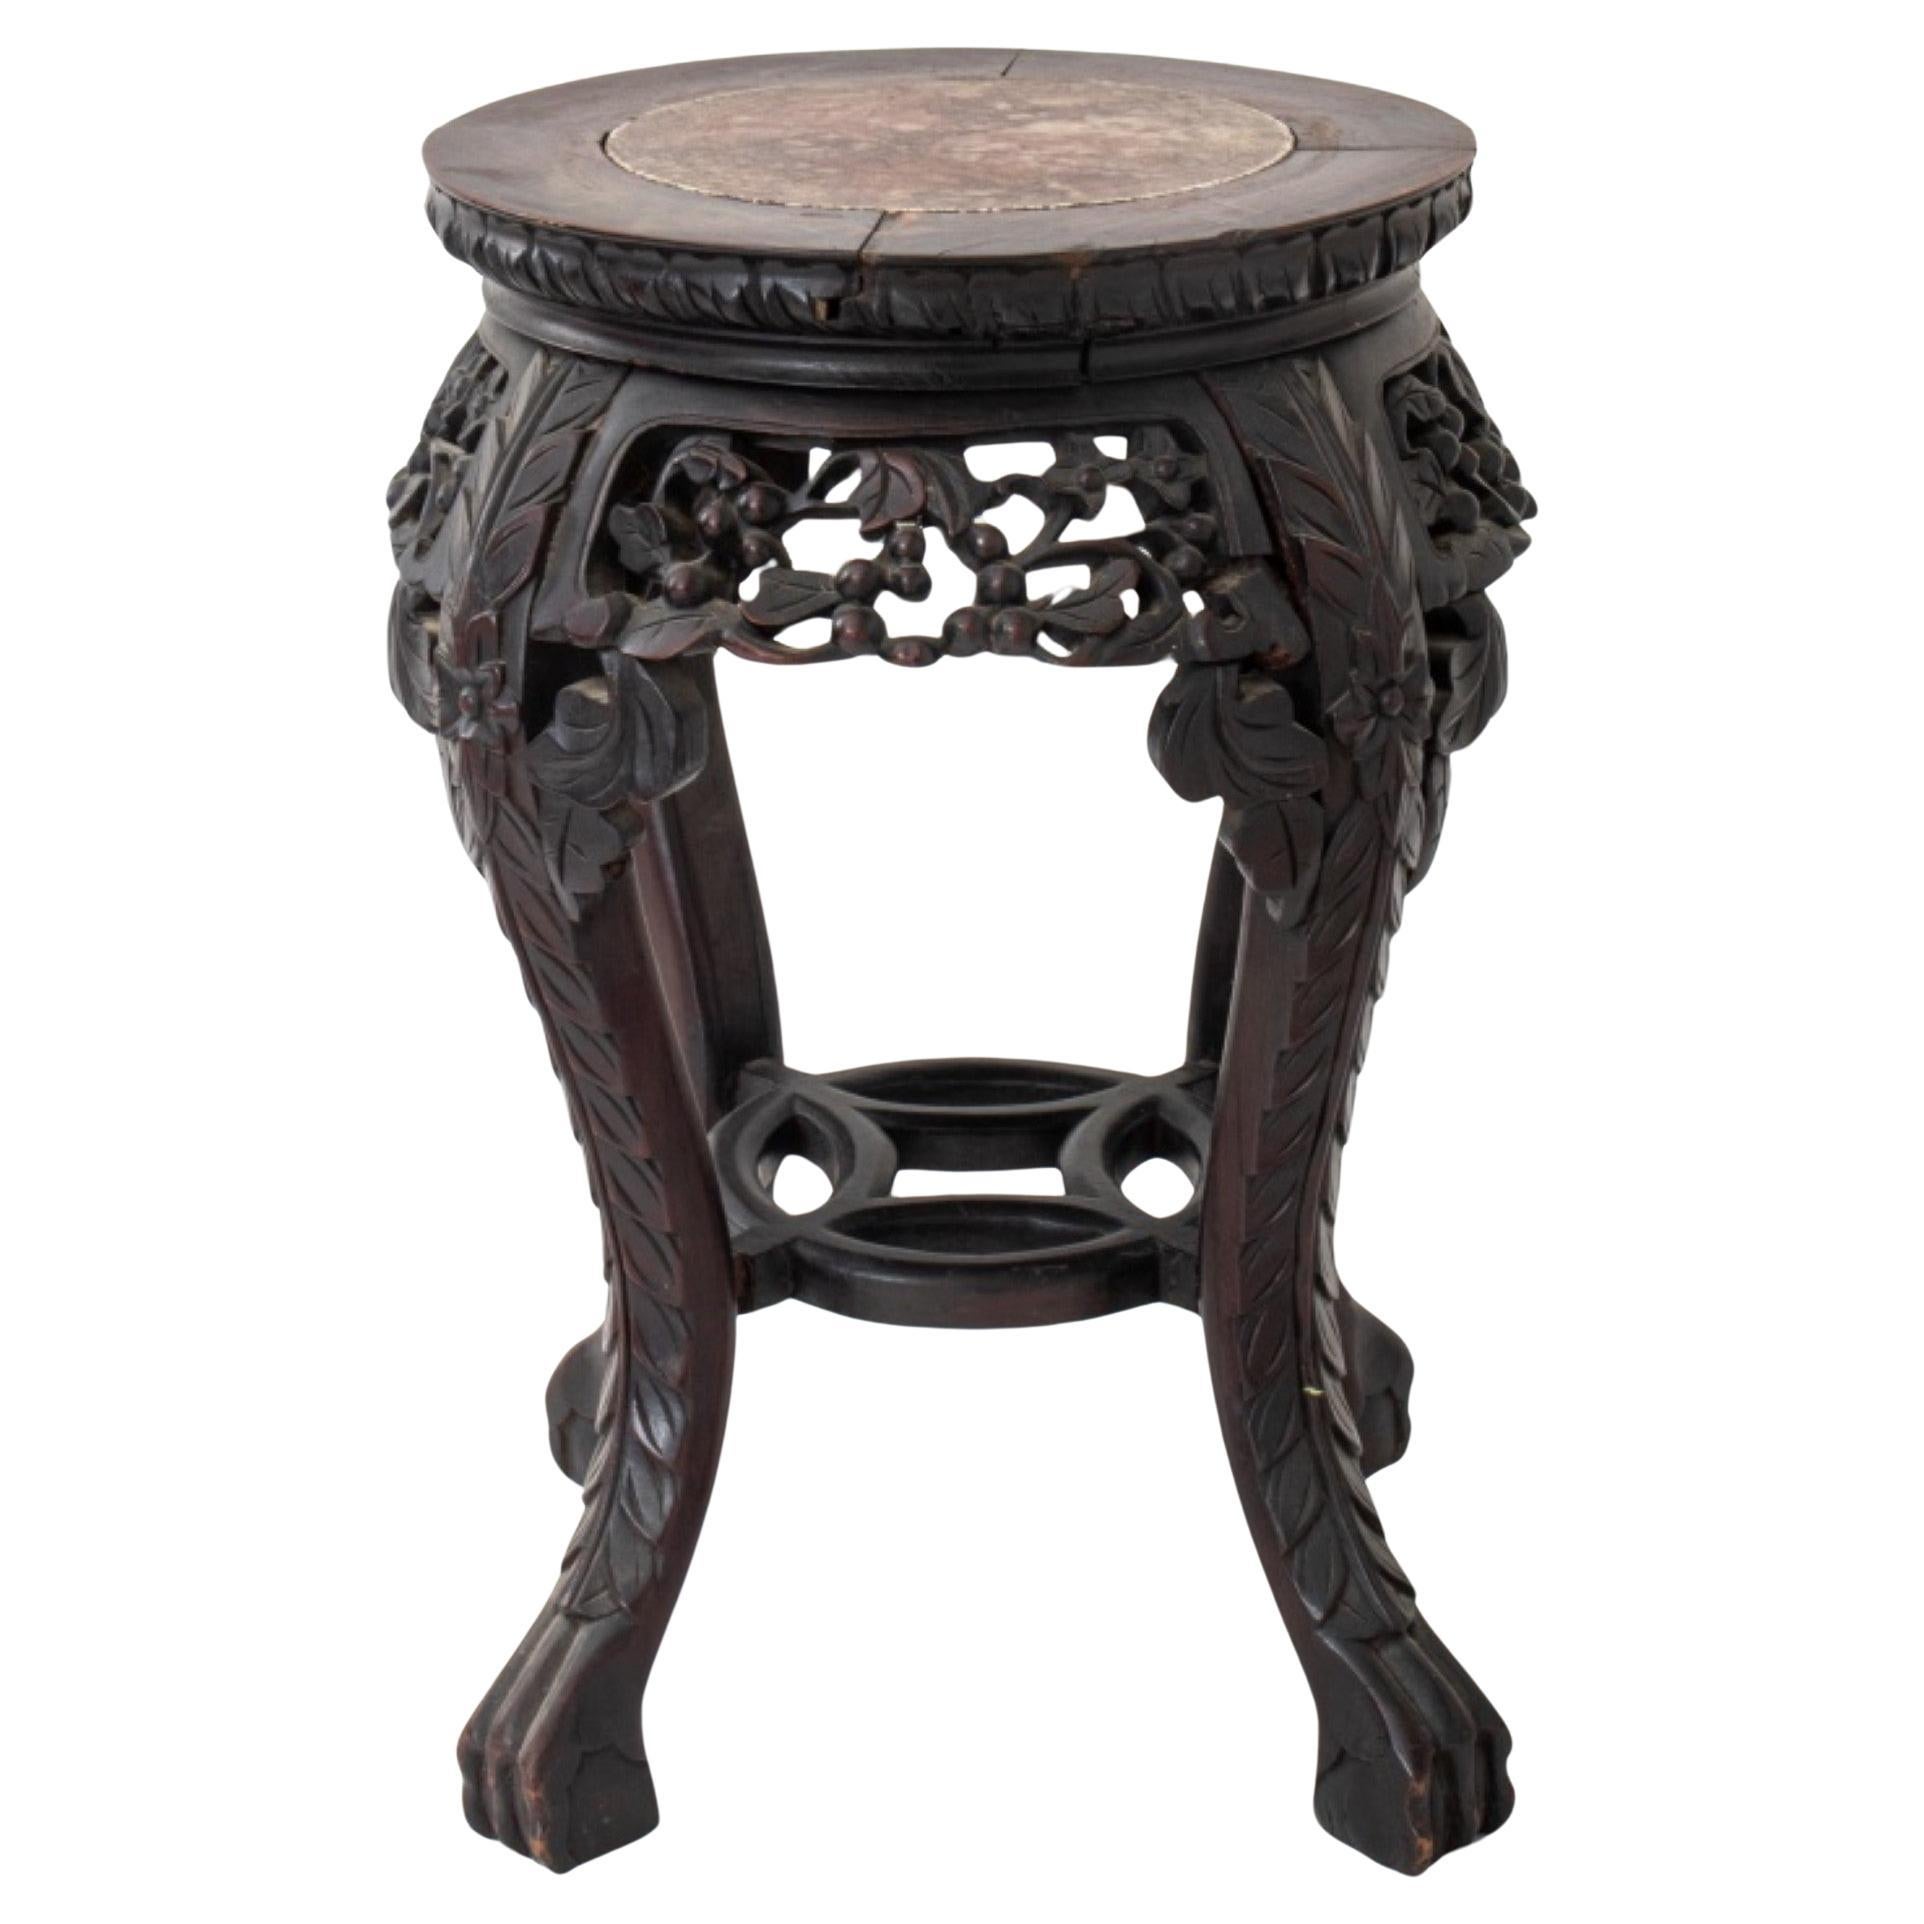 Chinese Marble Mounted Carved Side Table, 19th C.